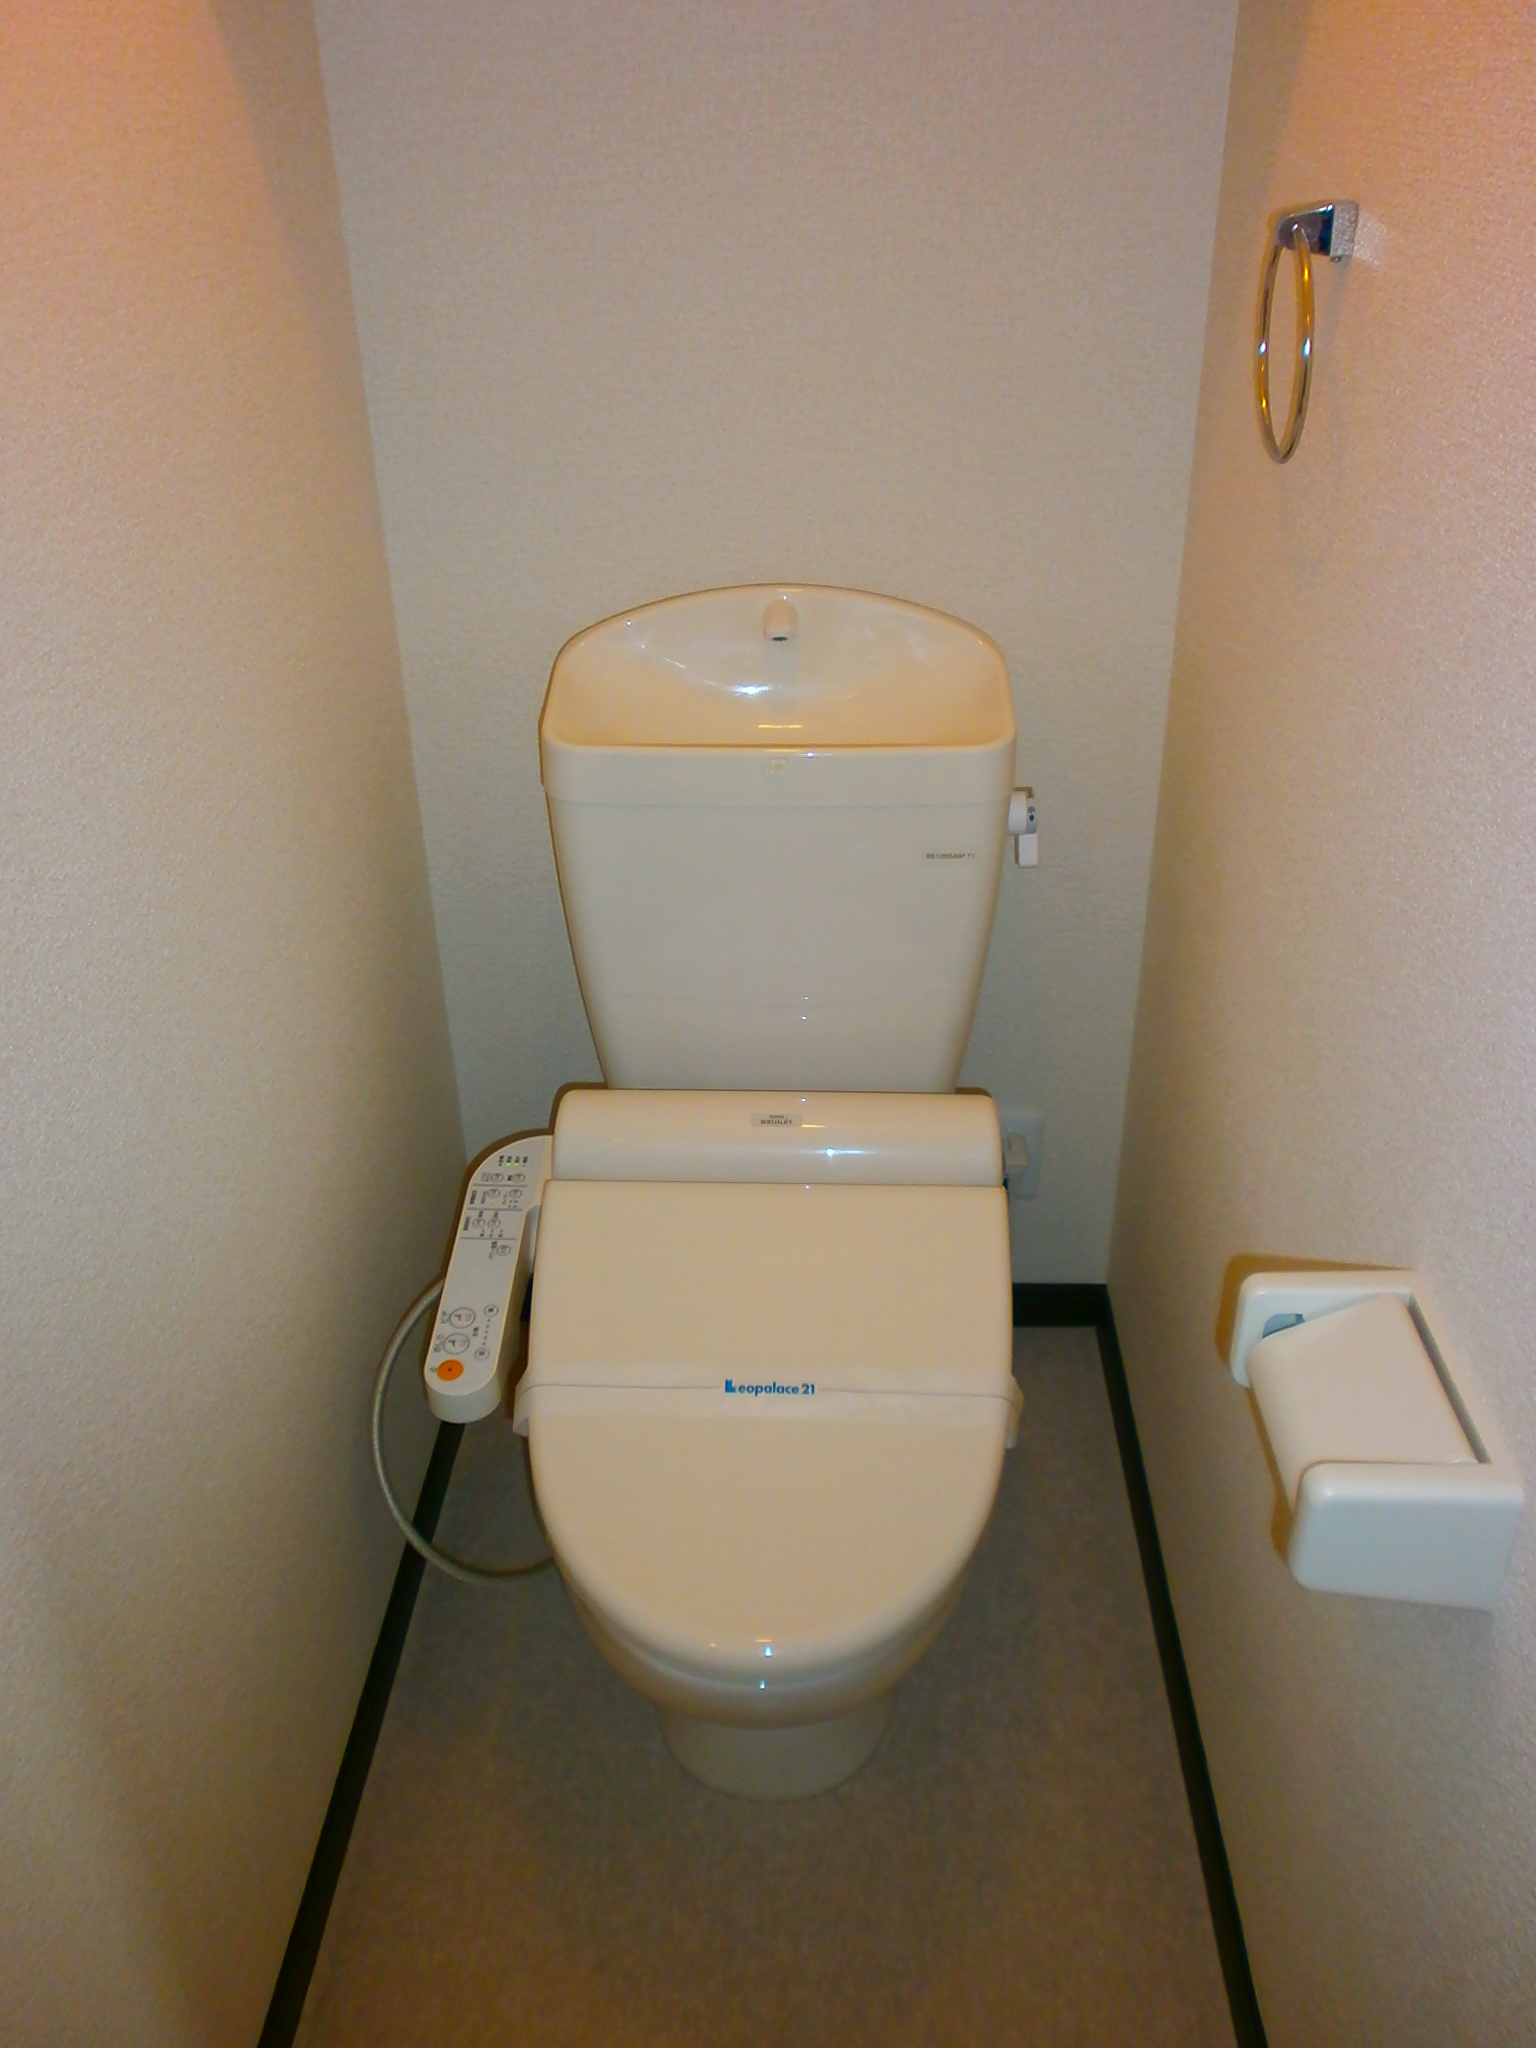 Toilet. It is with warm water washing toilet seat! 